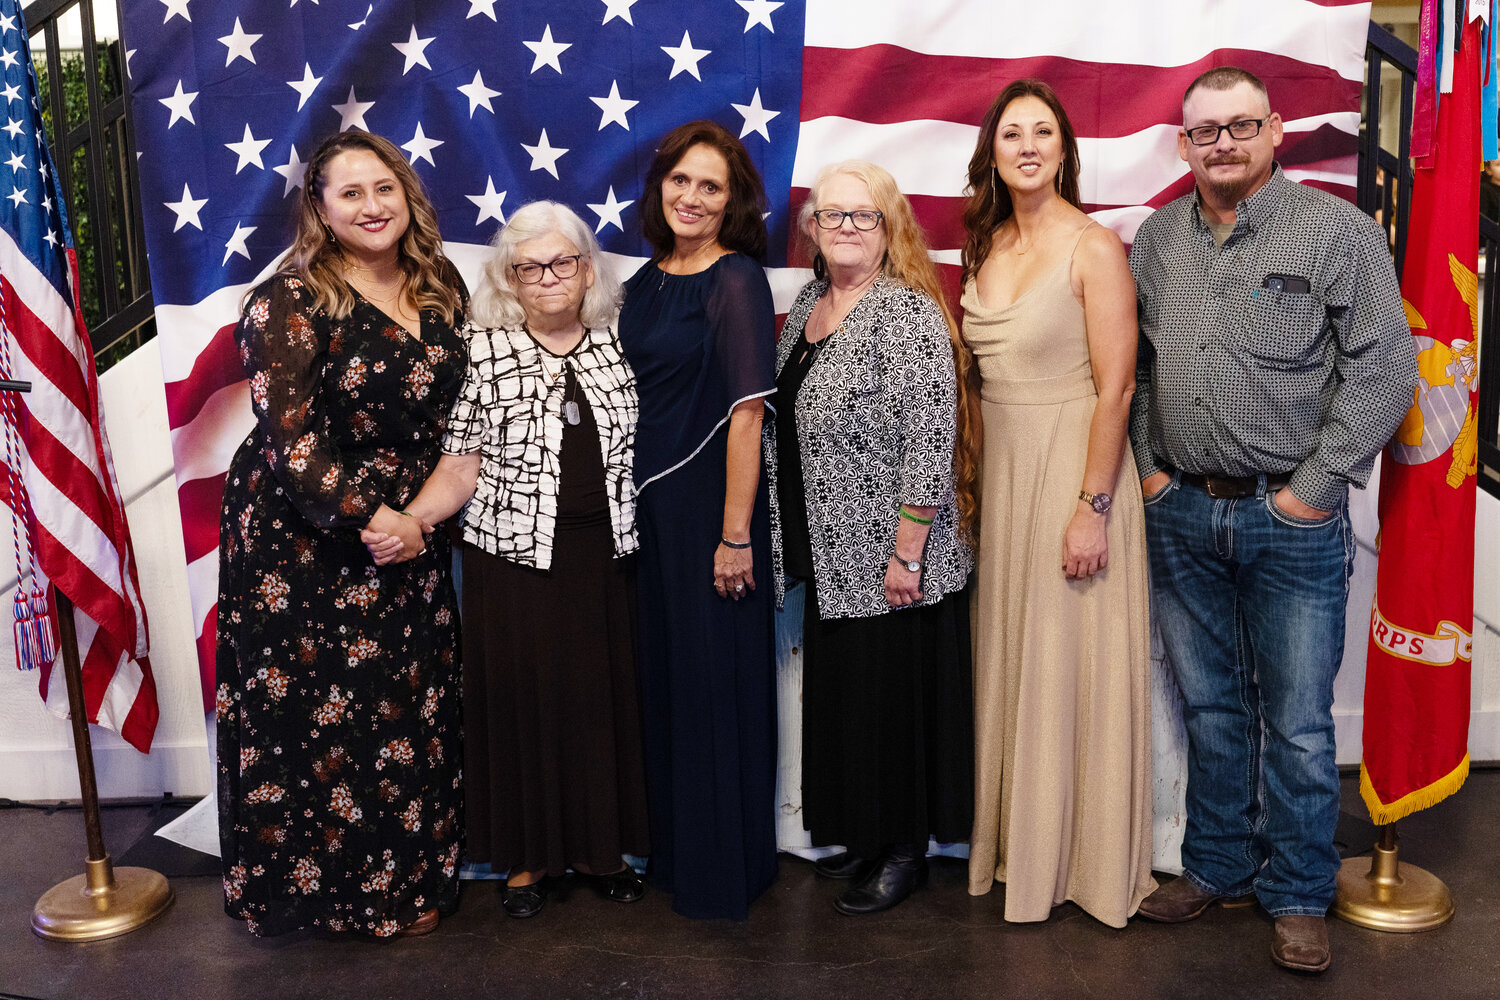 Gold Star families honored by the Mineola Marine Corps League detachment at its annual ball were, from left, Christine Thomas, sister of fallen SSG Richard Vazquez, Army Spec. Forces 7th Group; Brenda Powell, mother of fallen SGT Josh Powell, US Army 793 Police Battalion; Teresa Melton, mother of SSG Vazquez; Kathy Lutonsky, family member of SGT Powell; Misty Goldman, sister of fallen Cpl Shane Goldman; and Jeremy Powell, brother of SGT Powell.